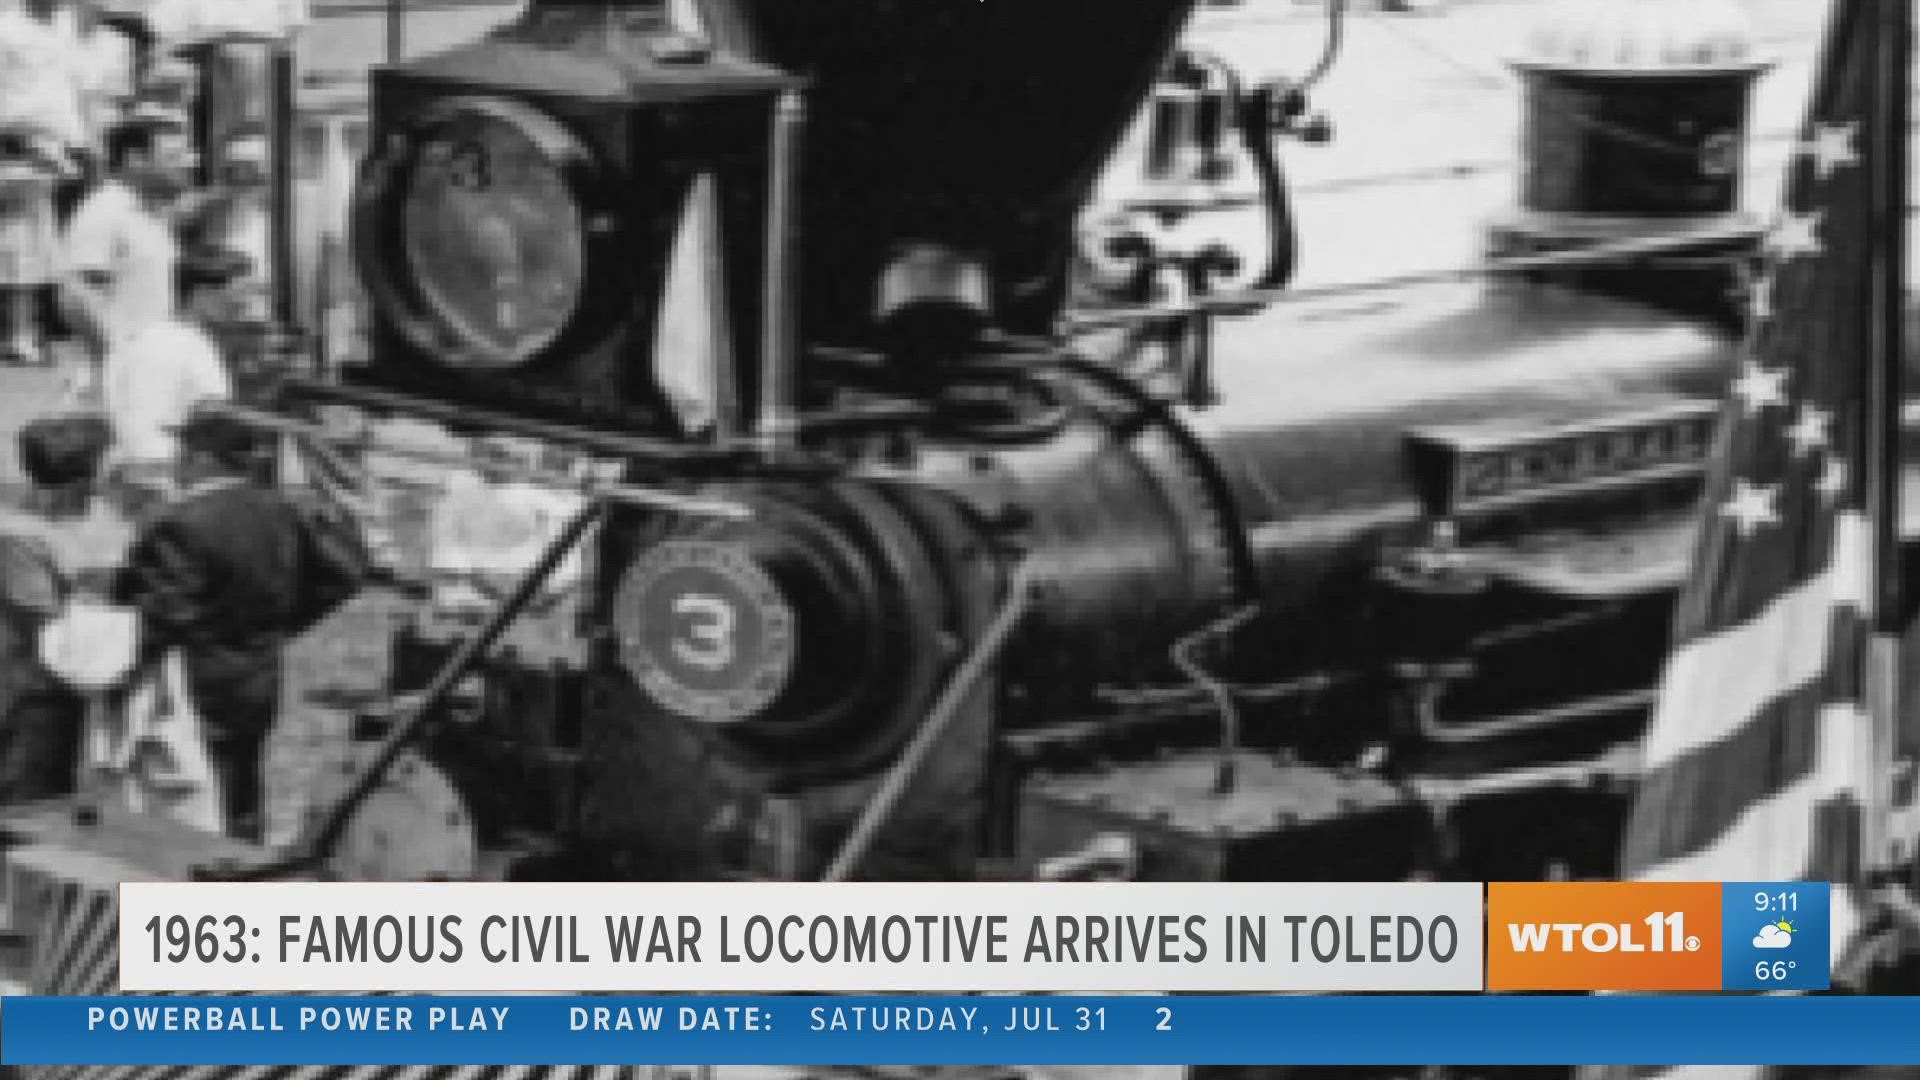 In 1963, "The General," the famous locomotive commandeered by Andrews Raiders in the Civil War, arrives at Toledo's Union Station.